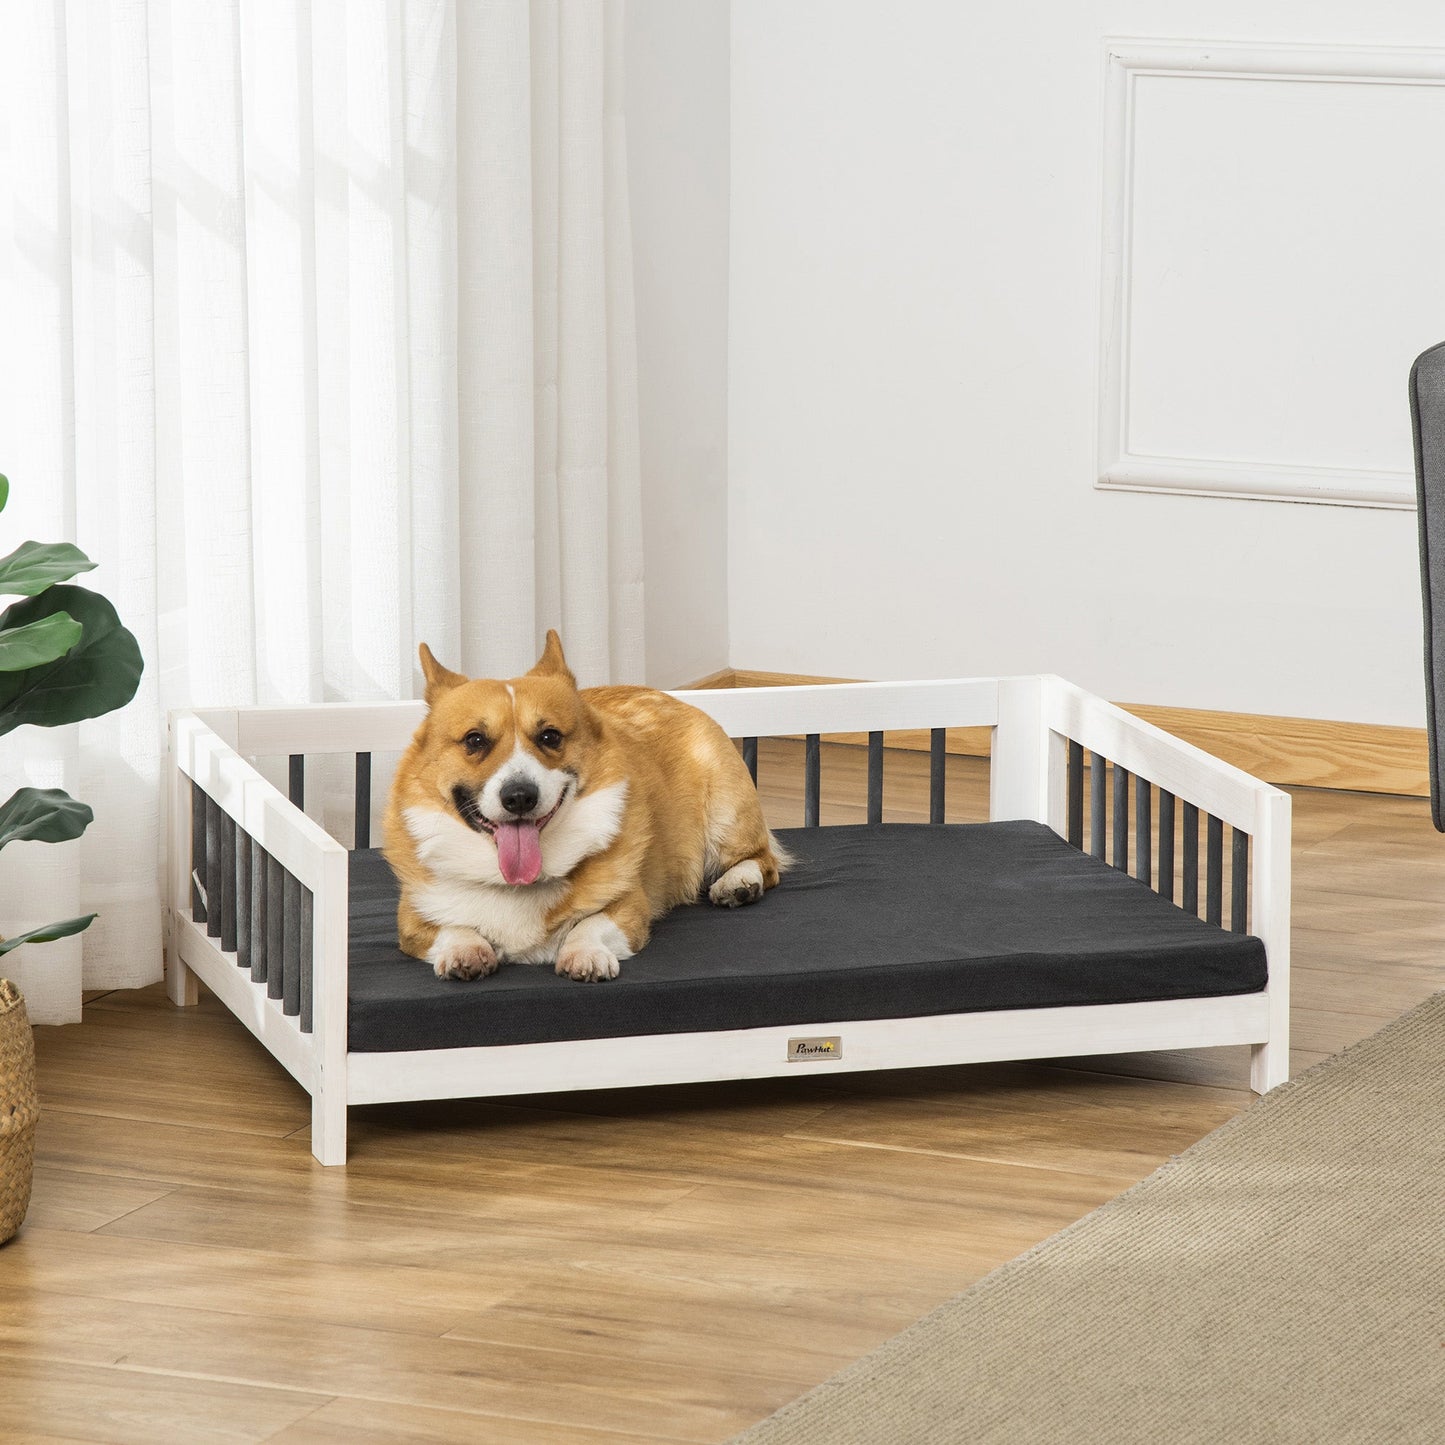 -PawHut Elevated Dog Bed, Wooden Raised Pet Sofa, Portable Cat Lounge with Soft Cushion, Washable Cover for Small, Medium Dogs and Cats, White Black - Outdoor Style Company